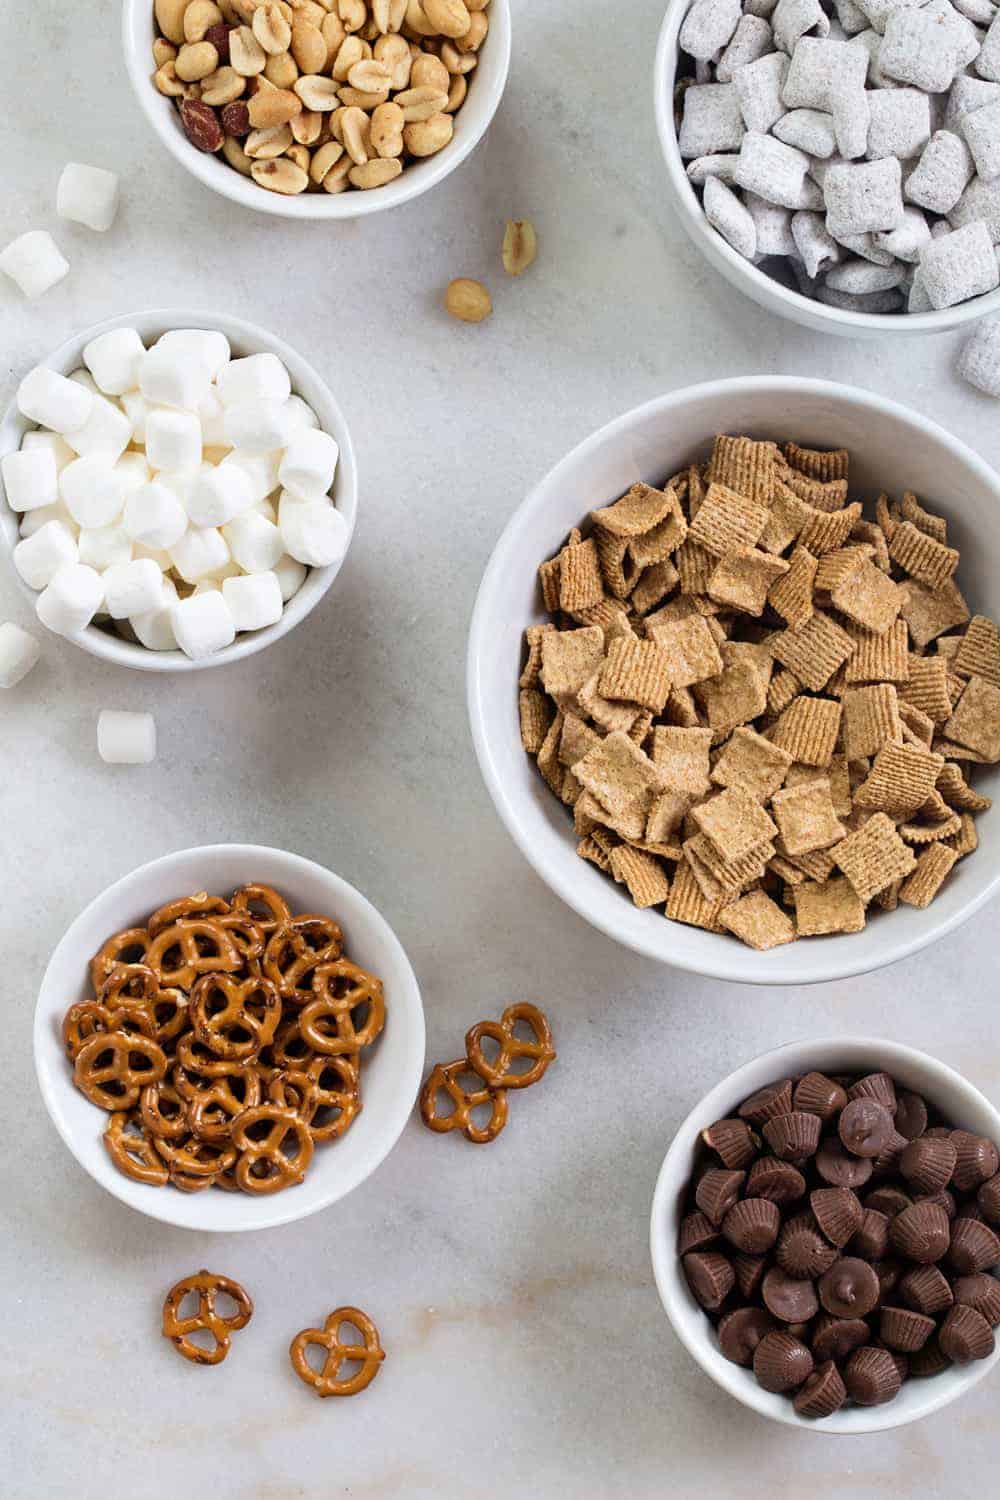 S'mores Snack Mix combines graham cereal, puppy chow, pretzels, peanuts, mini peanut butter cups and marshmallows to create the most delicious snack mix! So good!